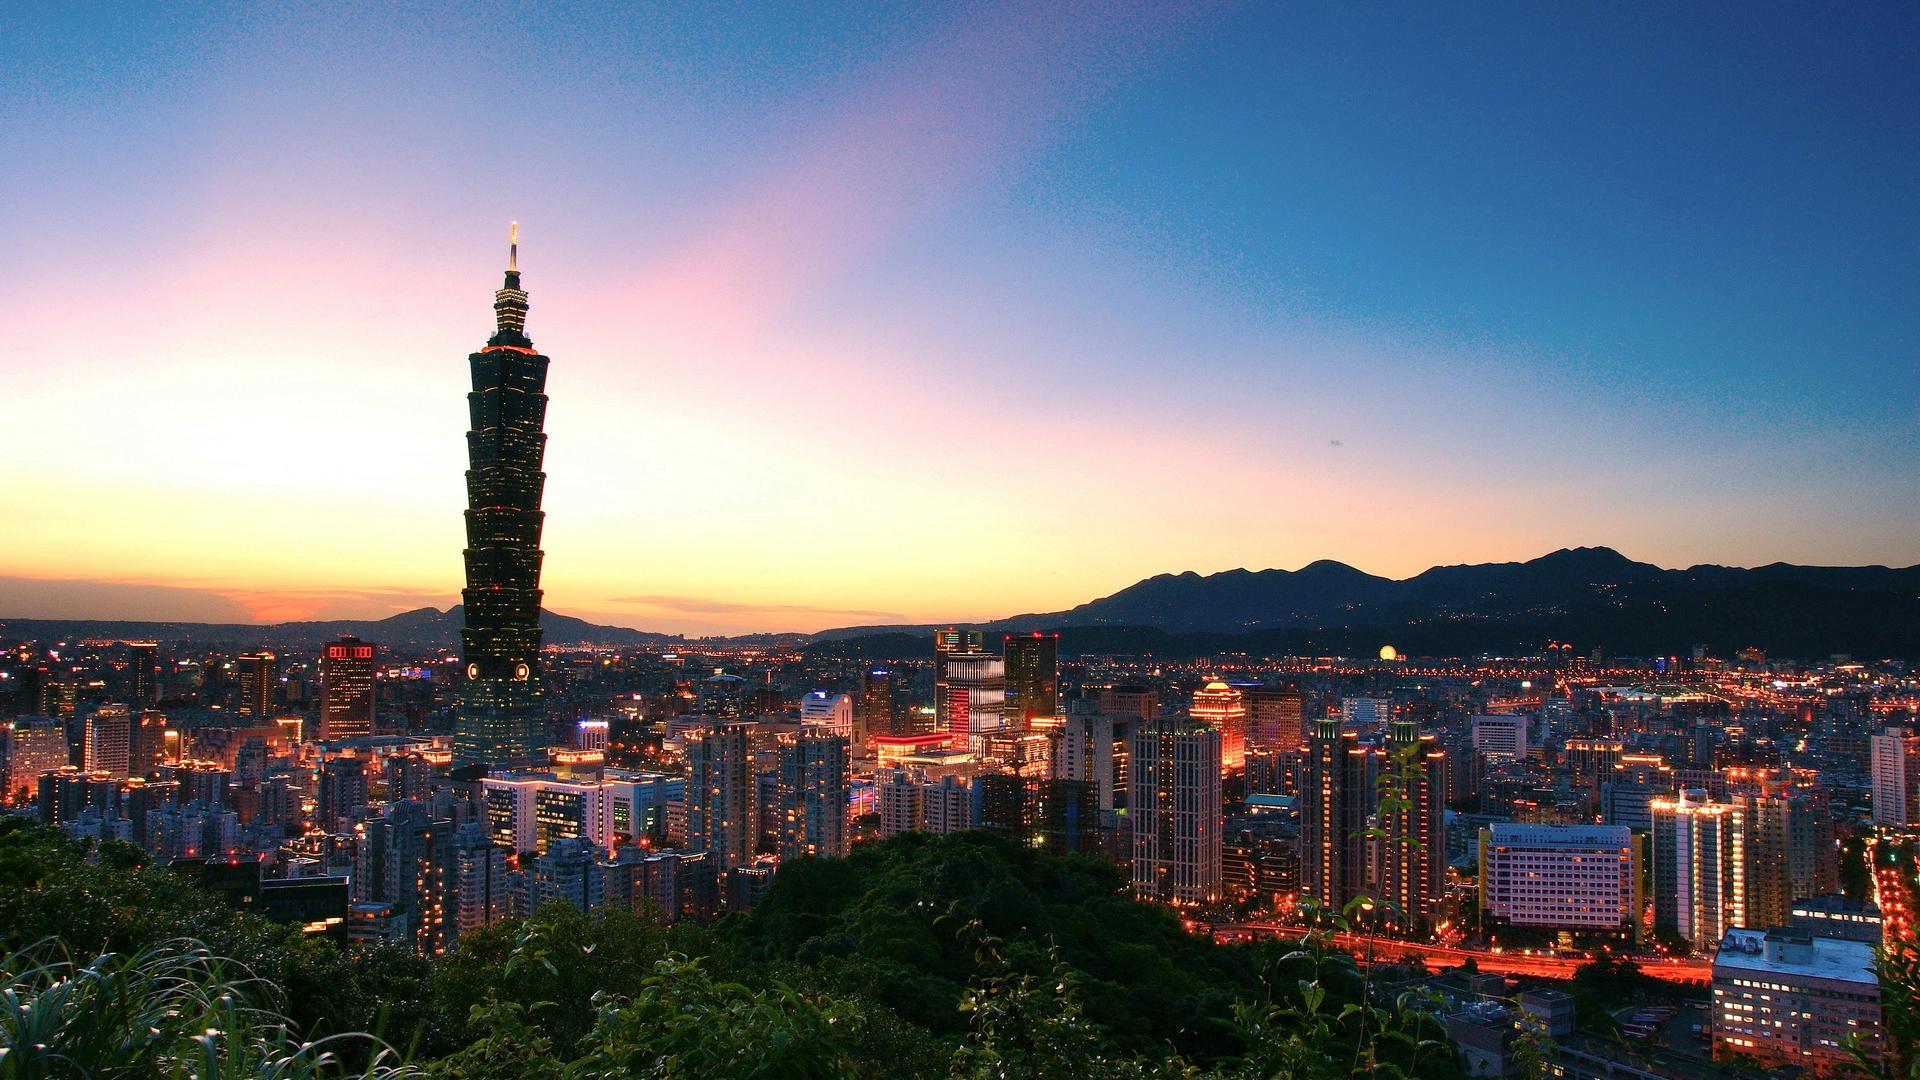 Taipei Tower Travel Wallpaper - Travel HD Backgrounds